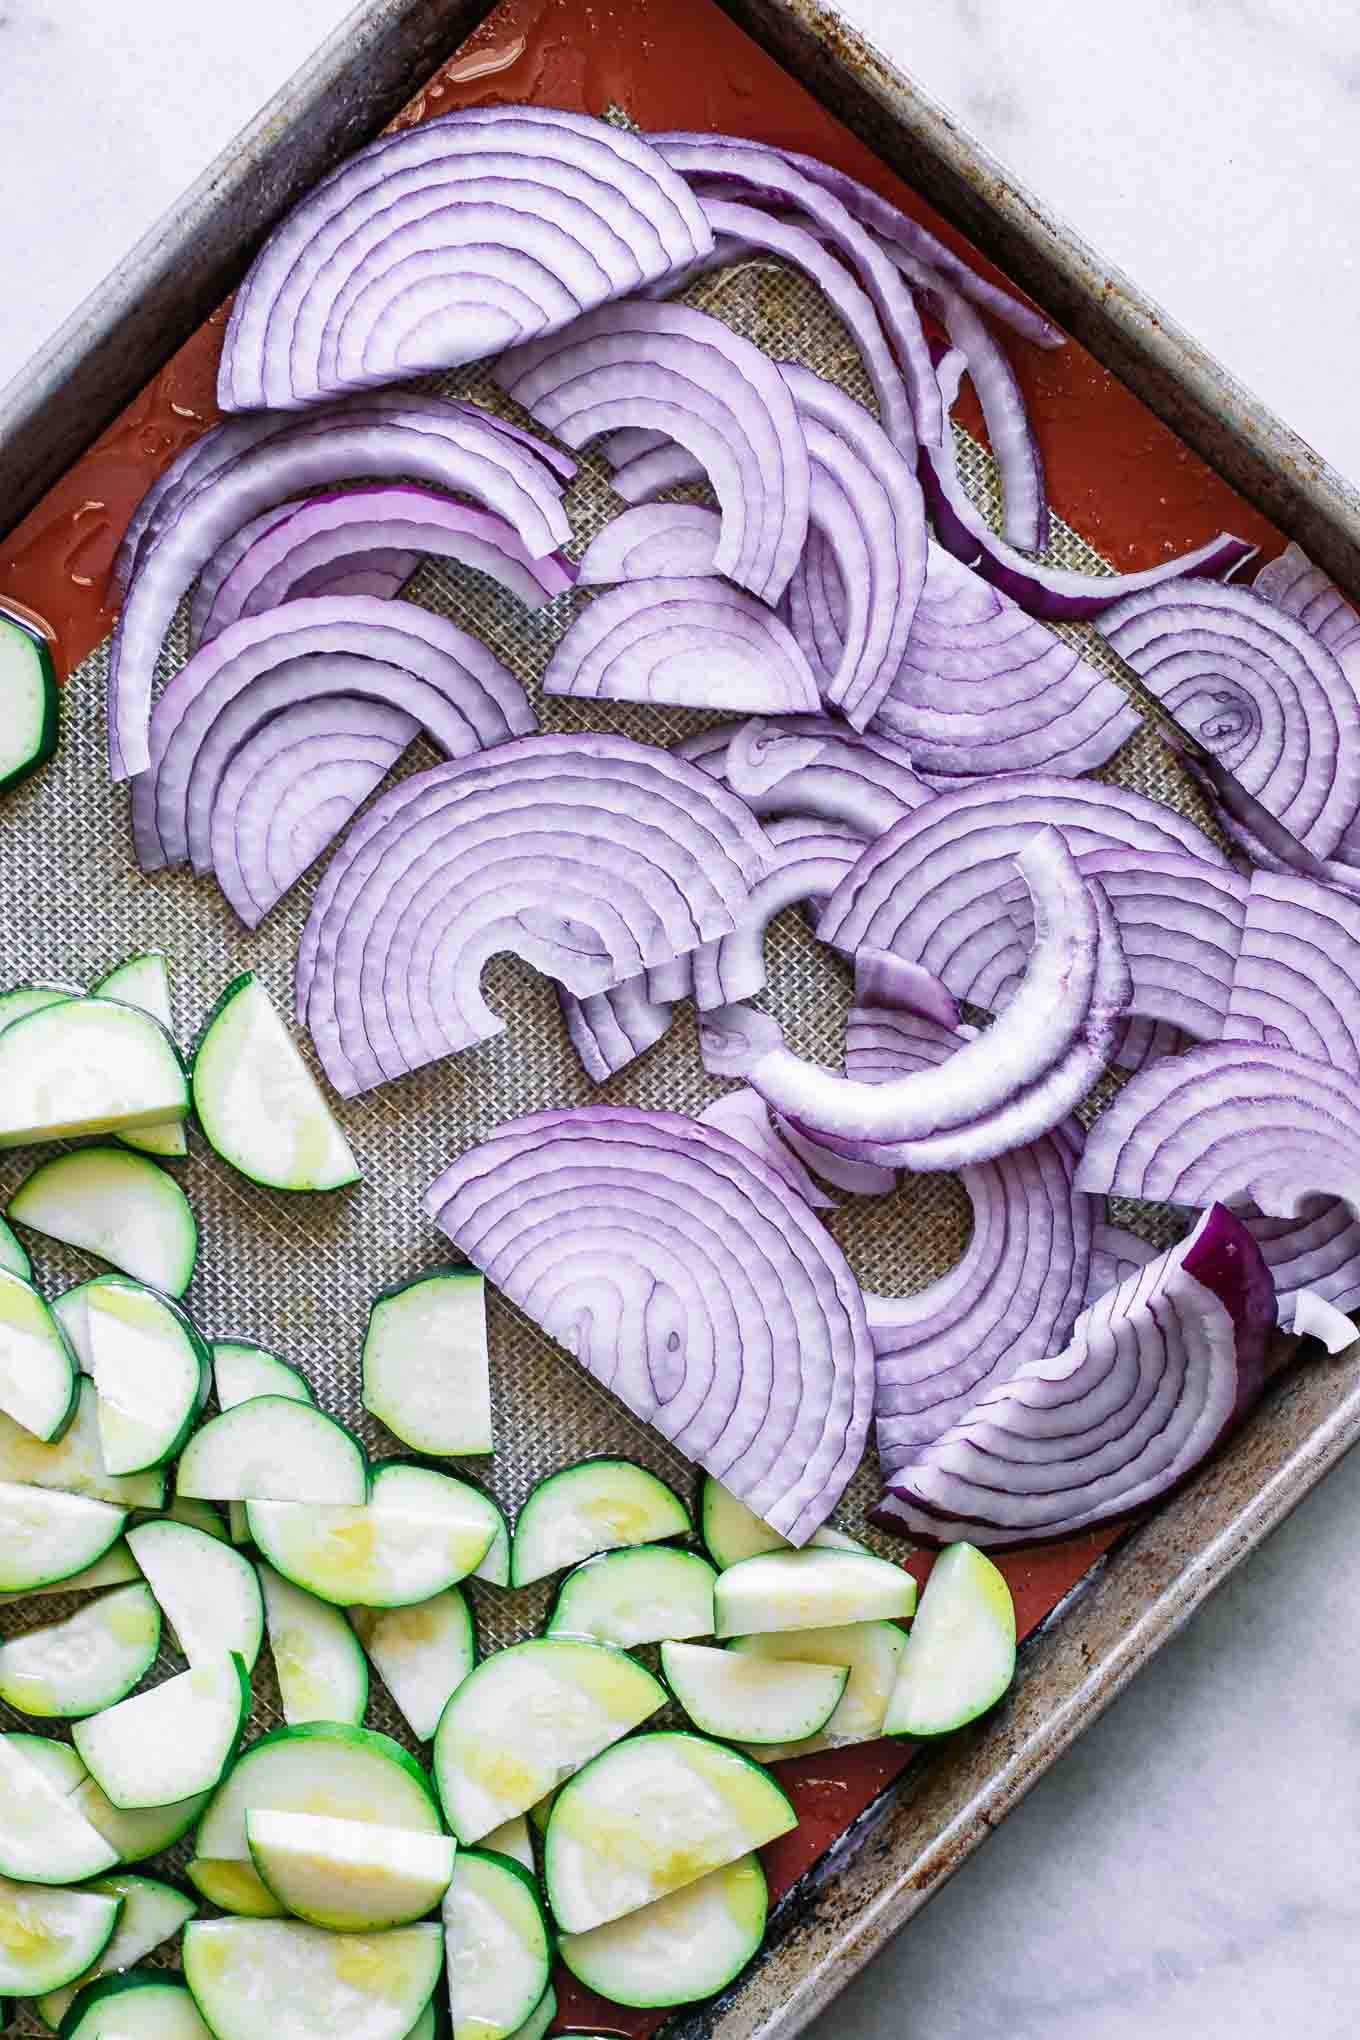 sliced red onion and zucchini on a roasting pan before baking